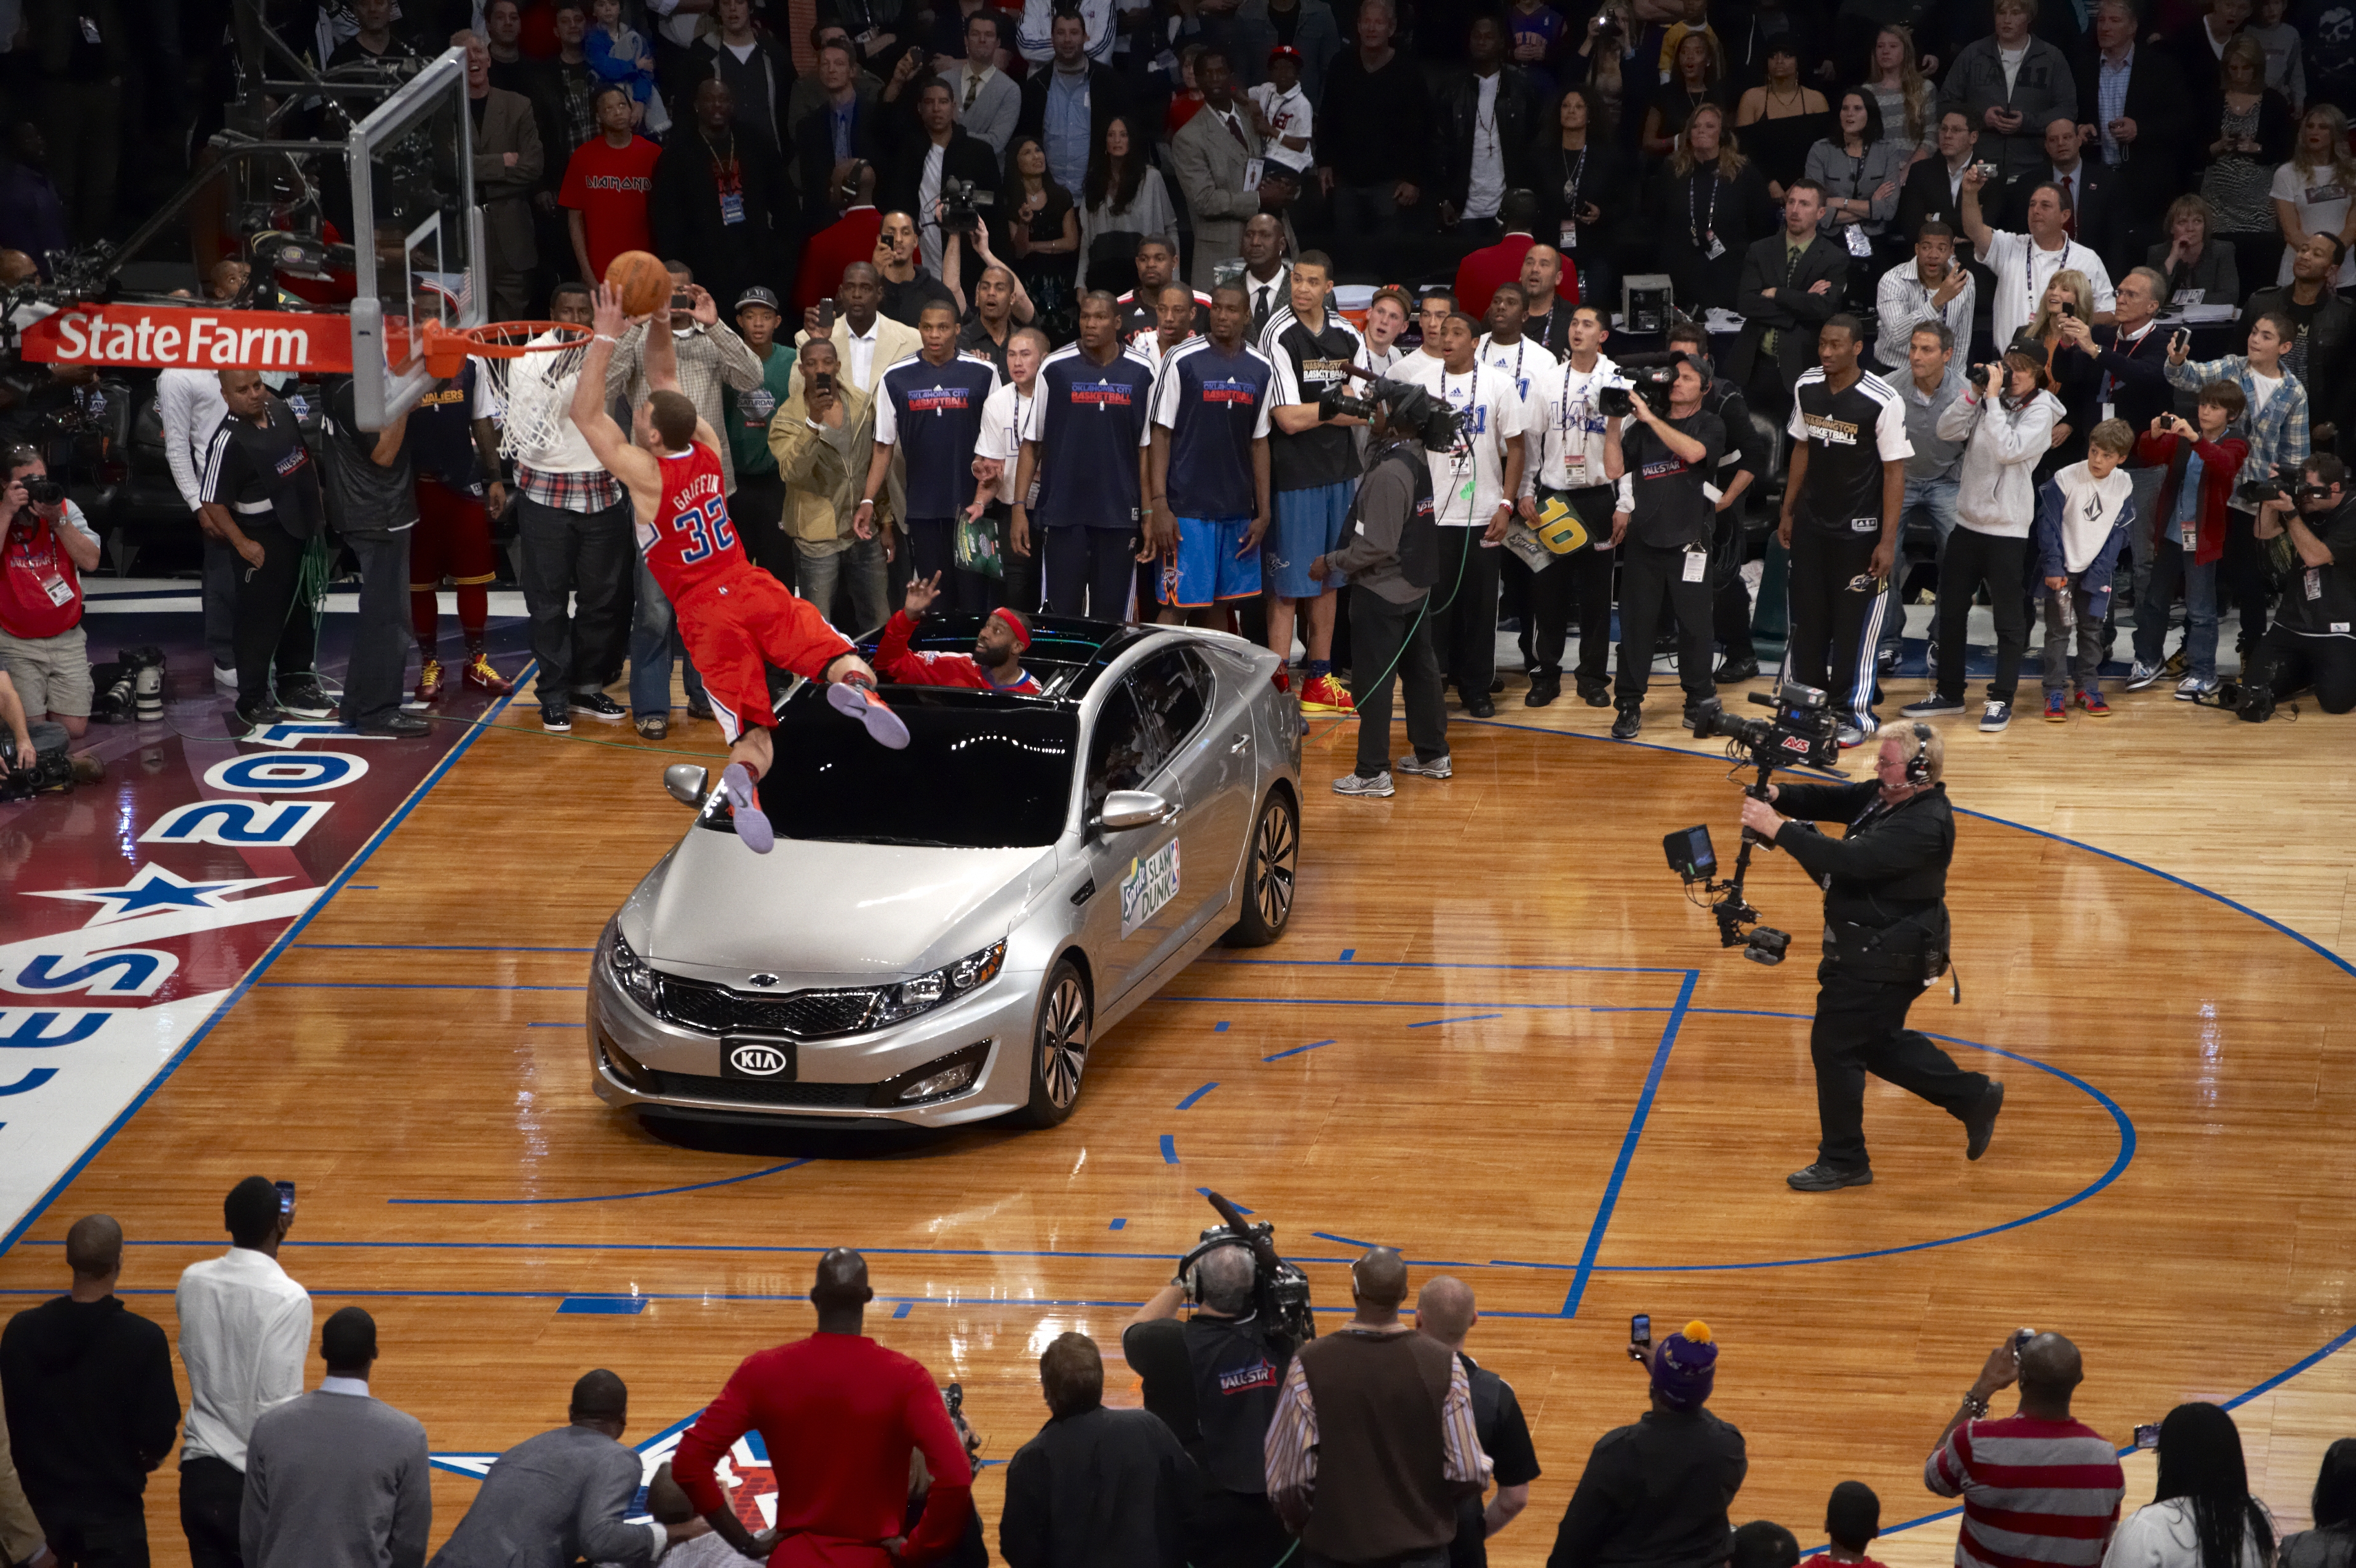 Blake Griffin Jumps Over a Kia in the 2011 Dunk Contest